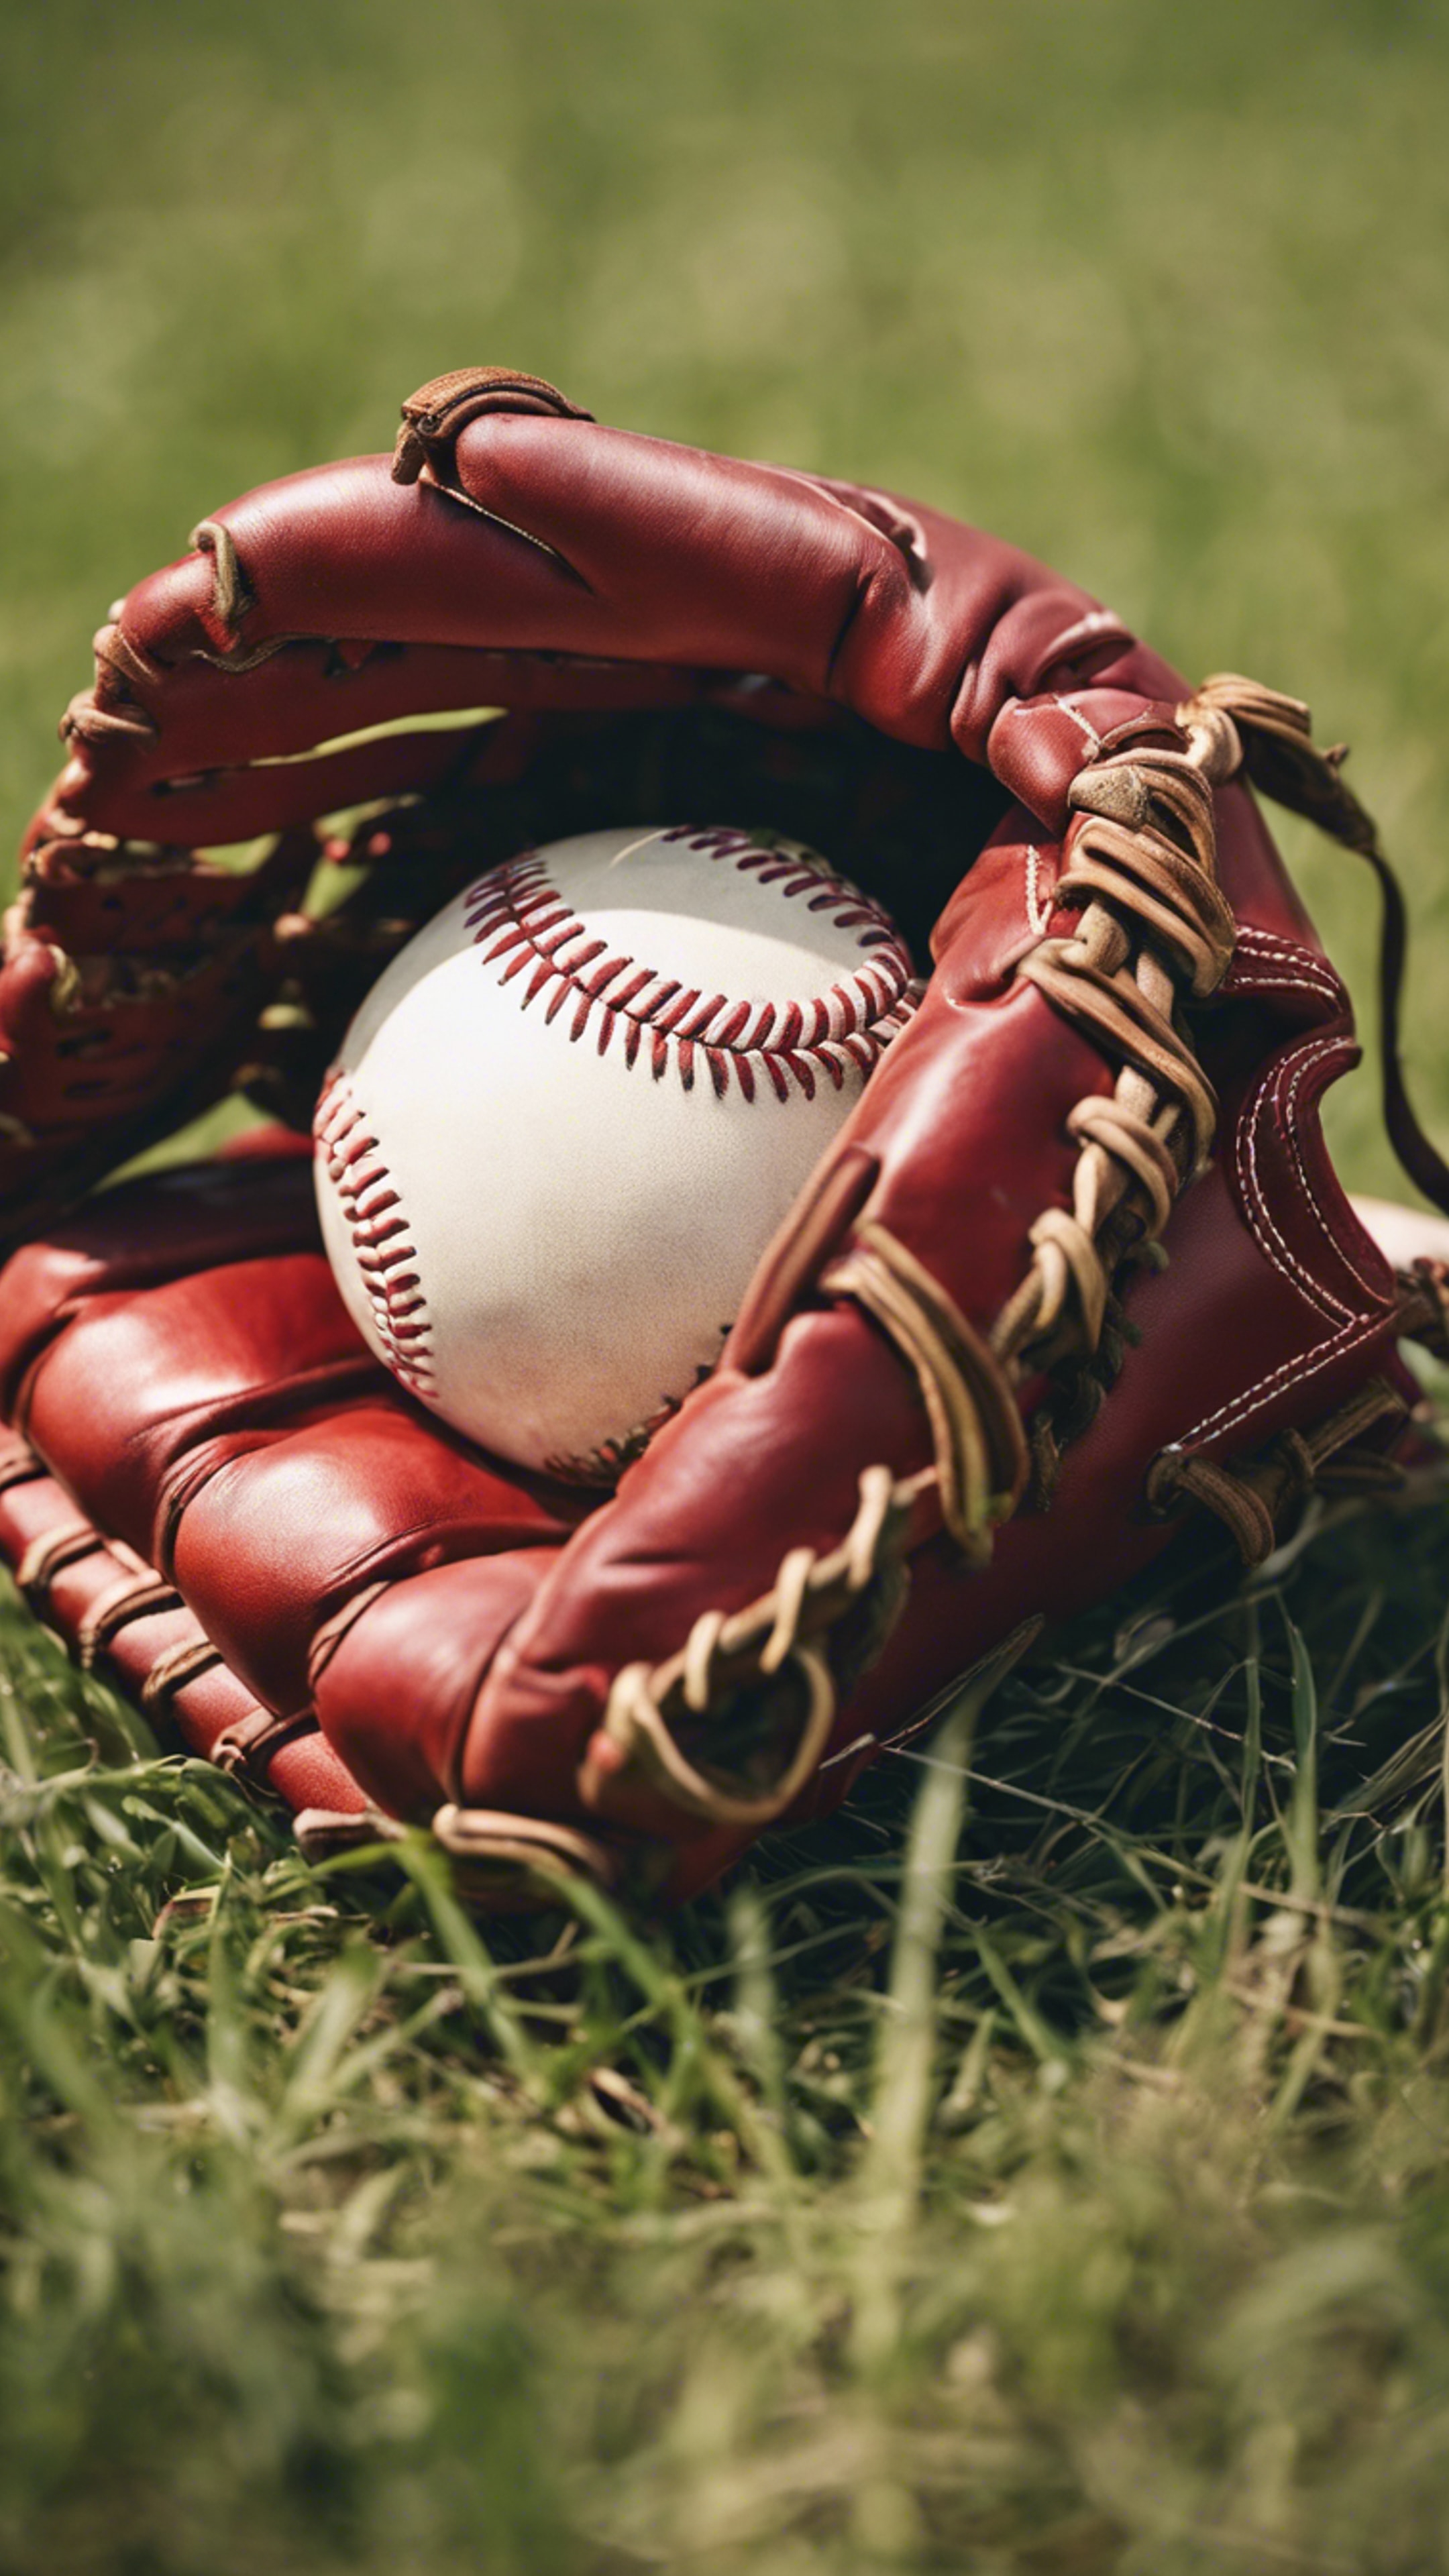 A striking red leather baseball glove on a grassy field right after a game.壁紙[10102f7c198241d6b5bd]